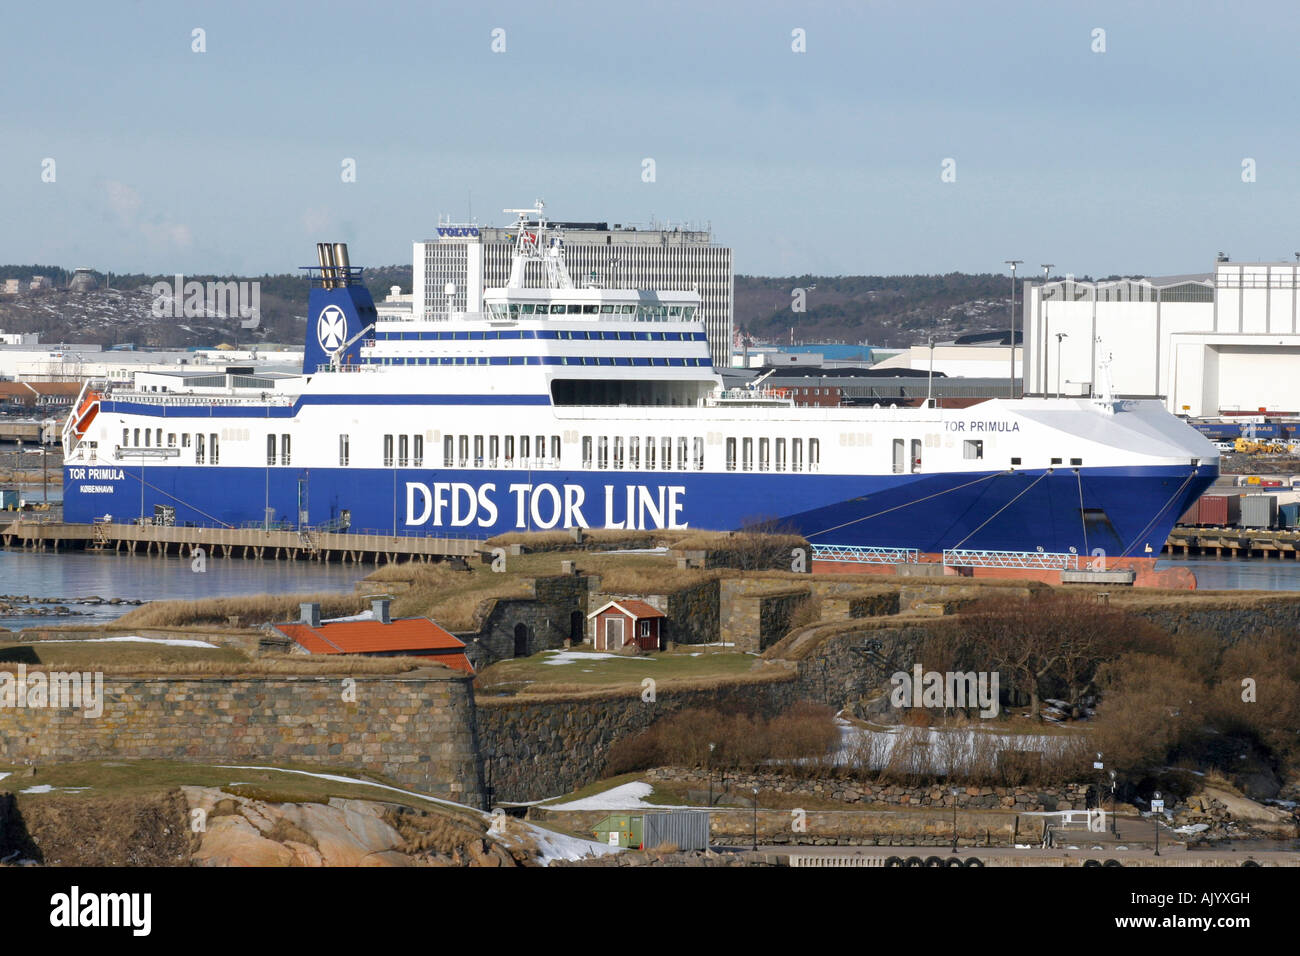 A DFDS Tor Line vessel at the Skandia Hamnen in Gothenburg. Stock Photo